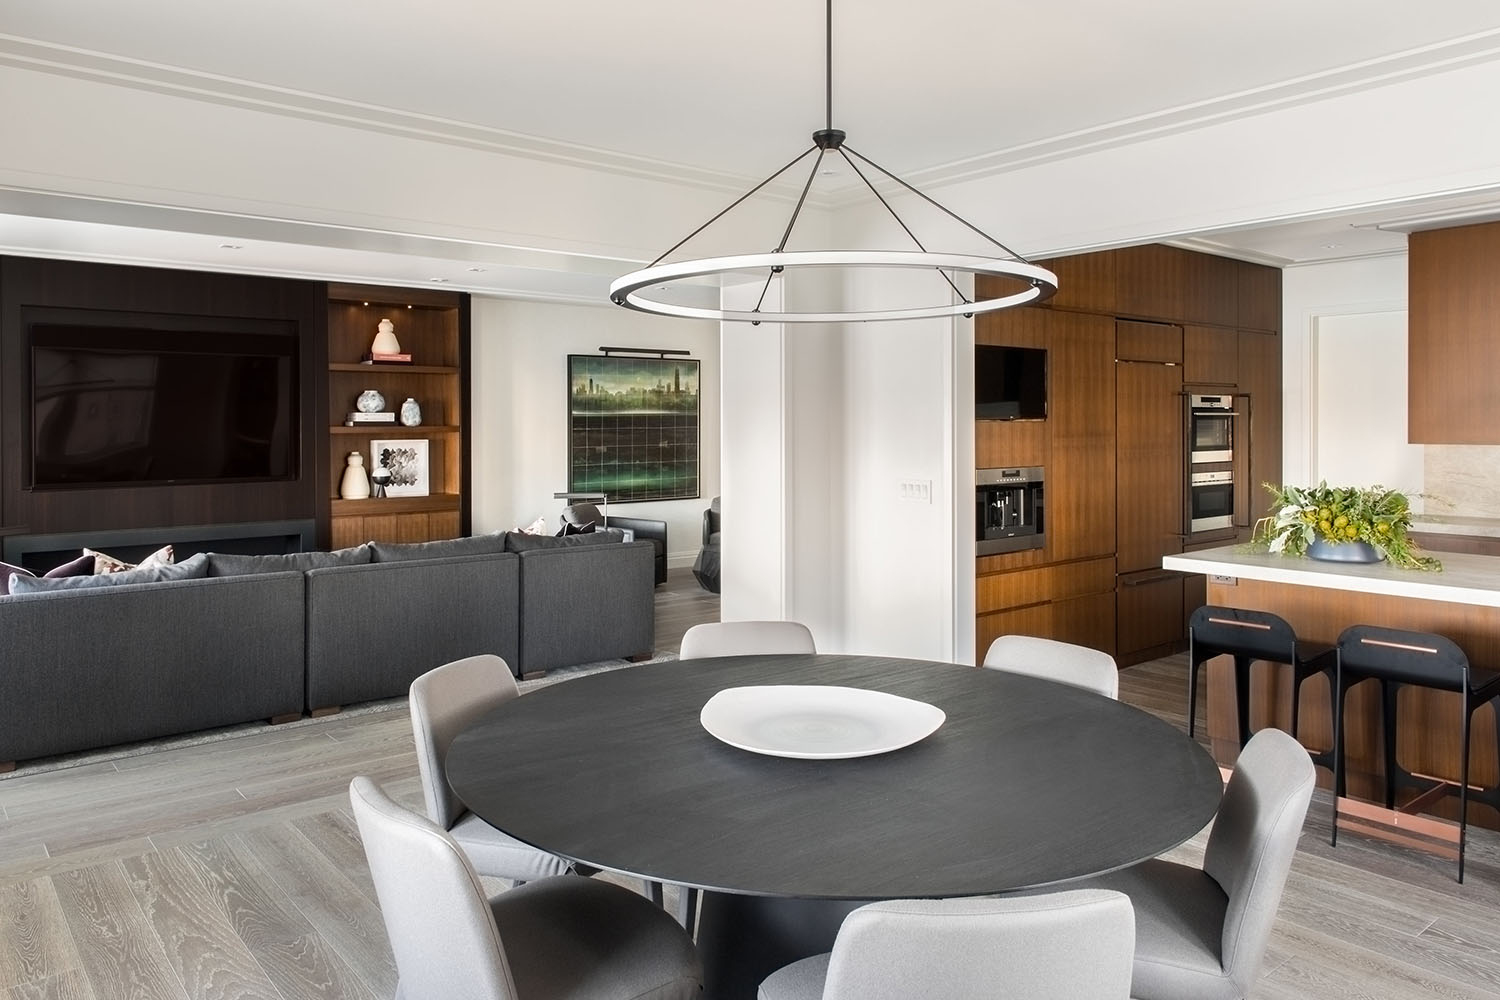 Luxury Residential Home Construction - Drake Tower Chicago dining area